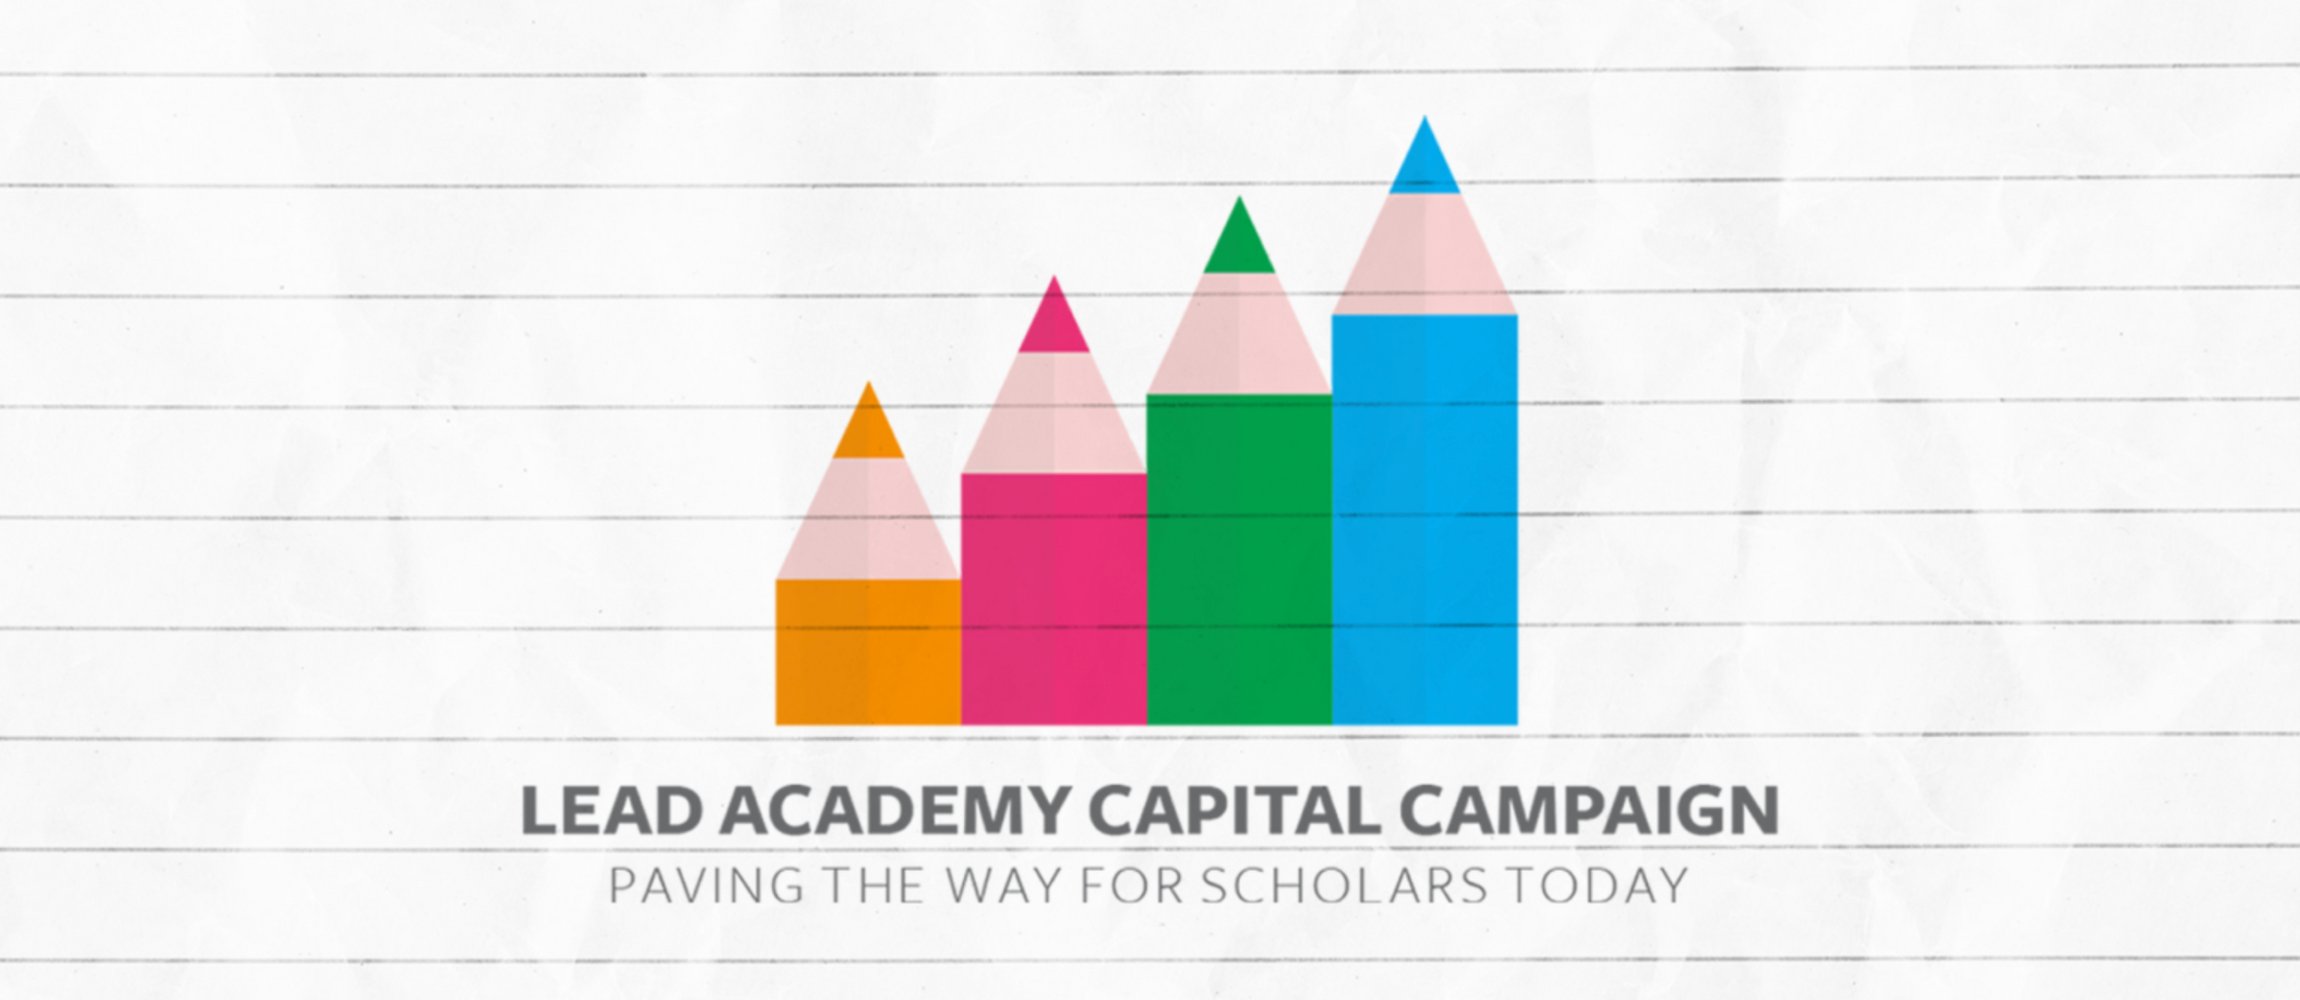 Lead Academy Capital Campaign.  Paving the way for scholars today. 